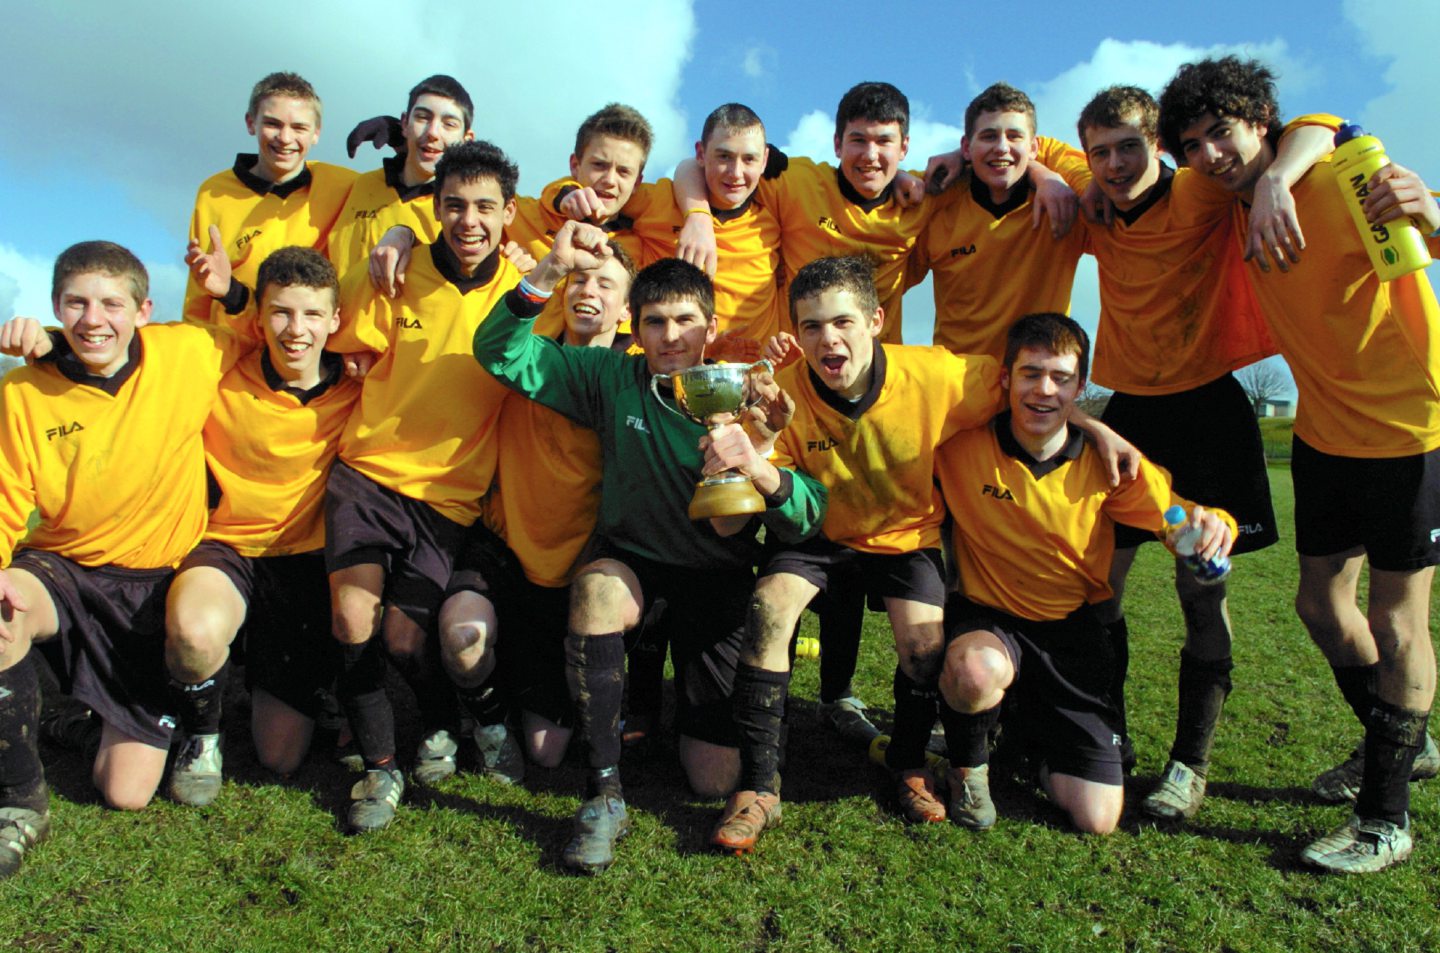 Inverurie Academy team posing for photos with a trophy